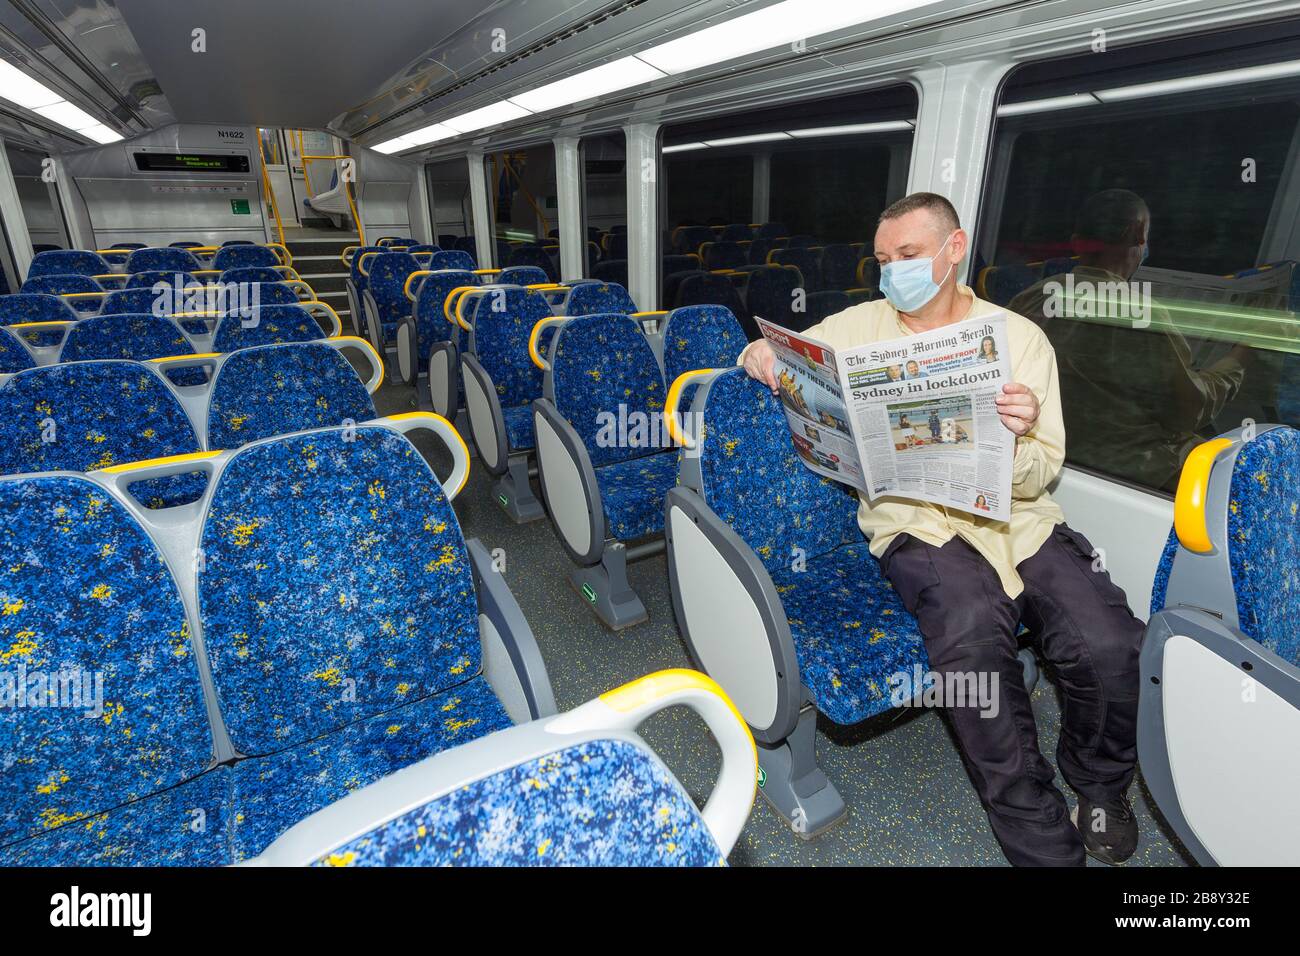 23 March, 2020: A lone man on an empty train reads Coronavirus news reports from the Sydney Morning Herald newspaper in Sydney, Australia, as the population abandons public places in anticipation of a city-wide lockdown. From midday today, many businesses and gathering places classified by the government as non-essential - such as pubs, restaurants, beaches, and even places of worship - have been deemed off-limits until further notice. Credit: Robert Wallace / Wallace Media Network / Alamy Live News. Stock Photo